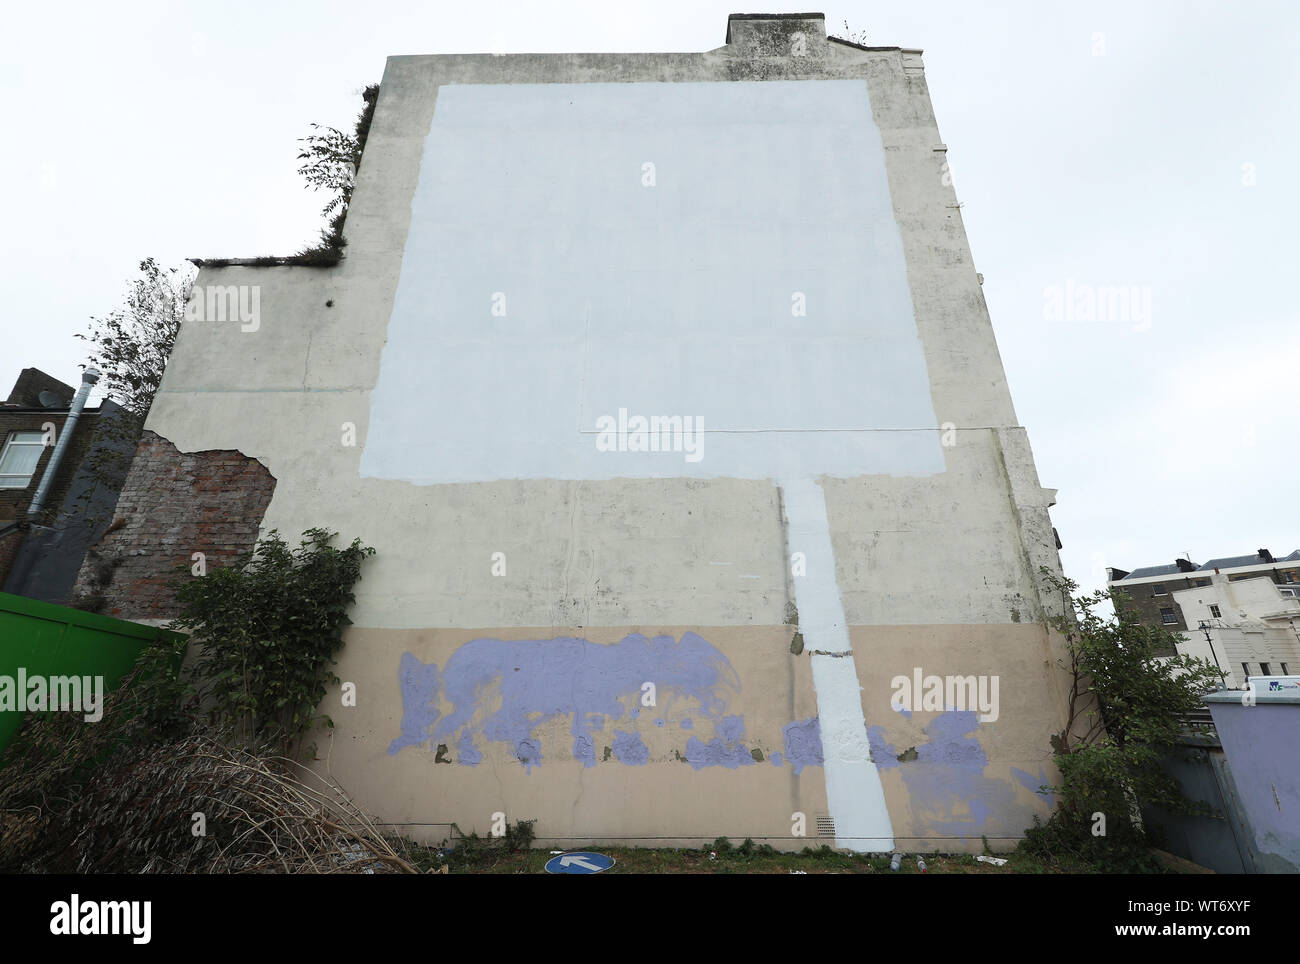 A Brexit-themed Banksy mural in Dover that has been mysteriously covered up with white paint. The artwork appeared on a former amusements arcade near Dover's busy ferry terminal in May 2017 and showed an EU flag with a workman chipping away one of the stars. Stock Photo